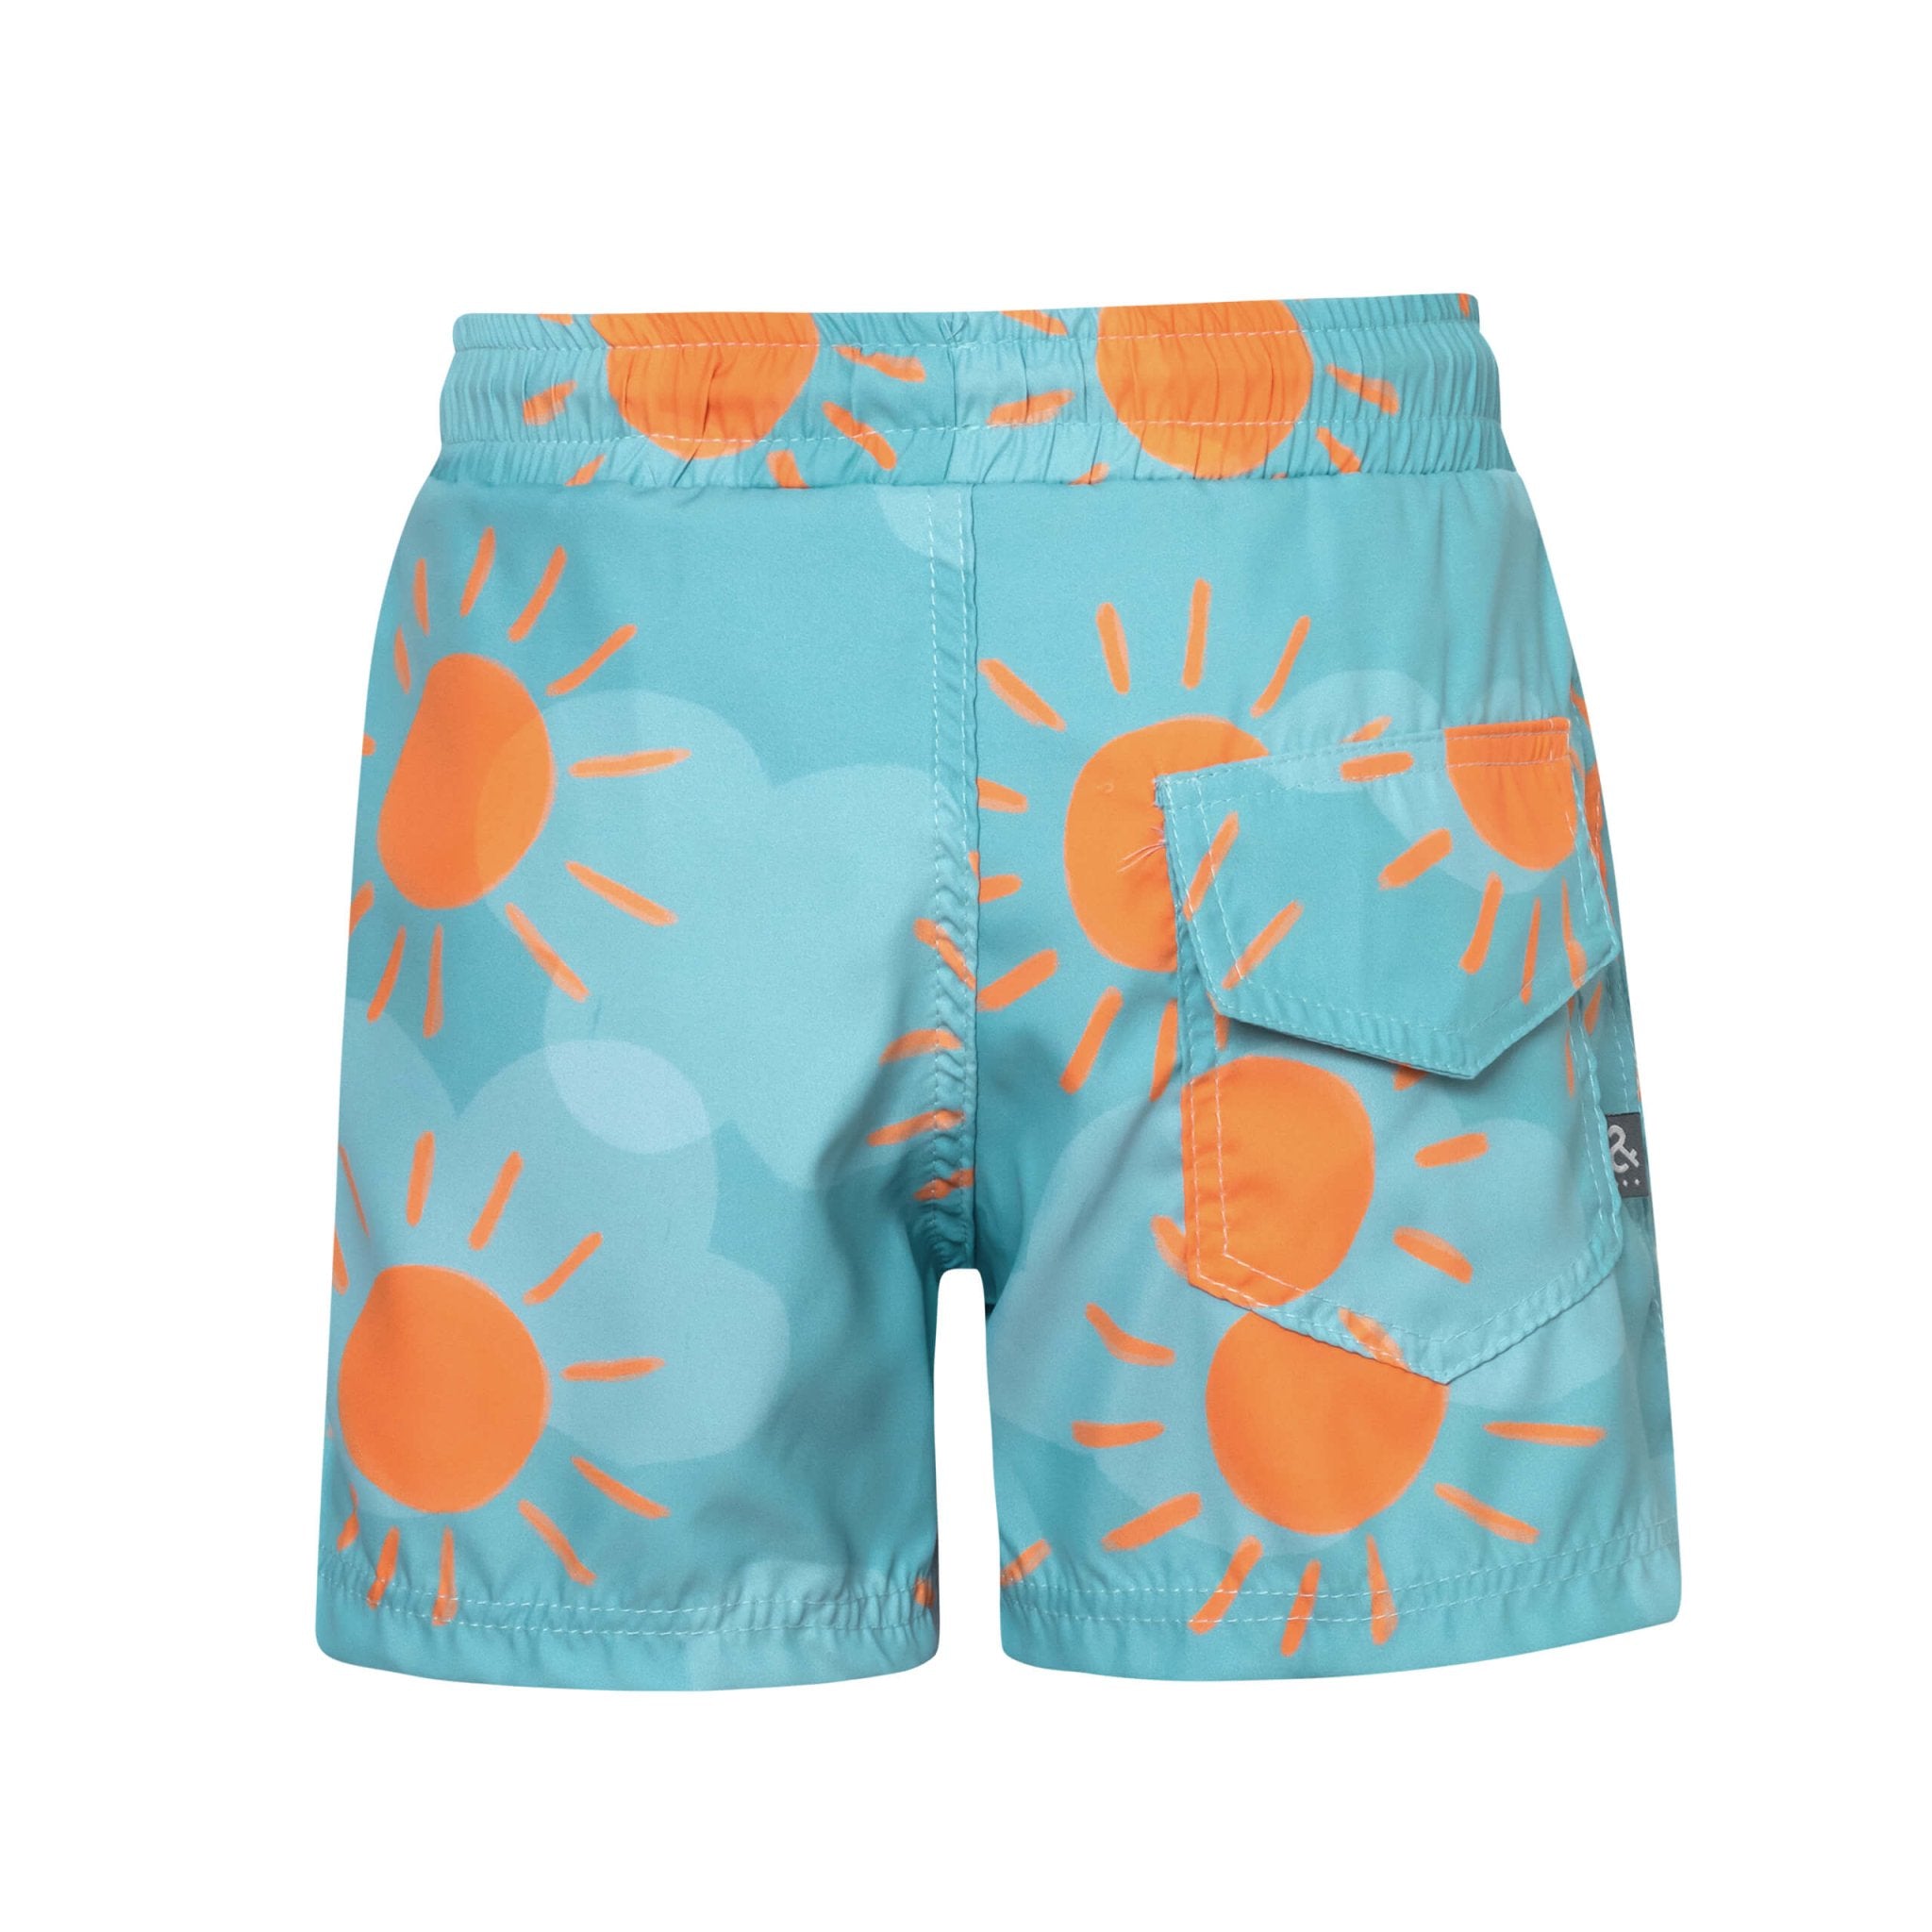 These shorts have an easy little back pocket. The back of the shorts are shown over a white background.